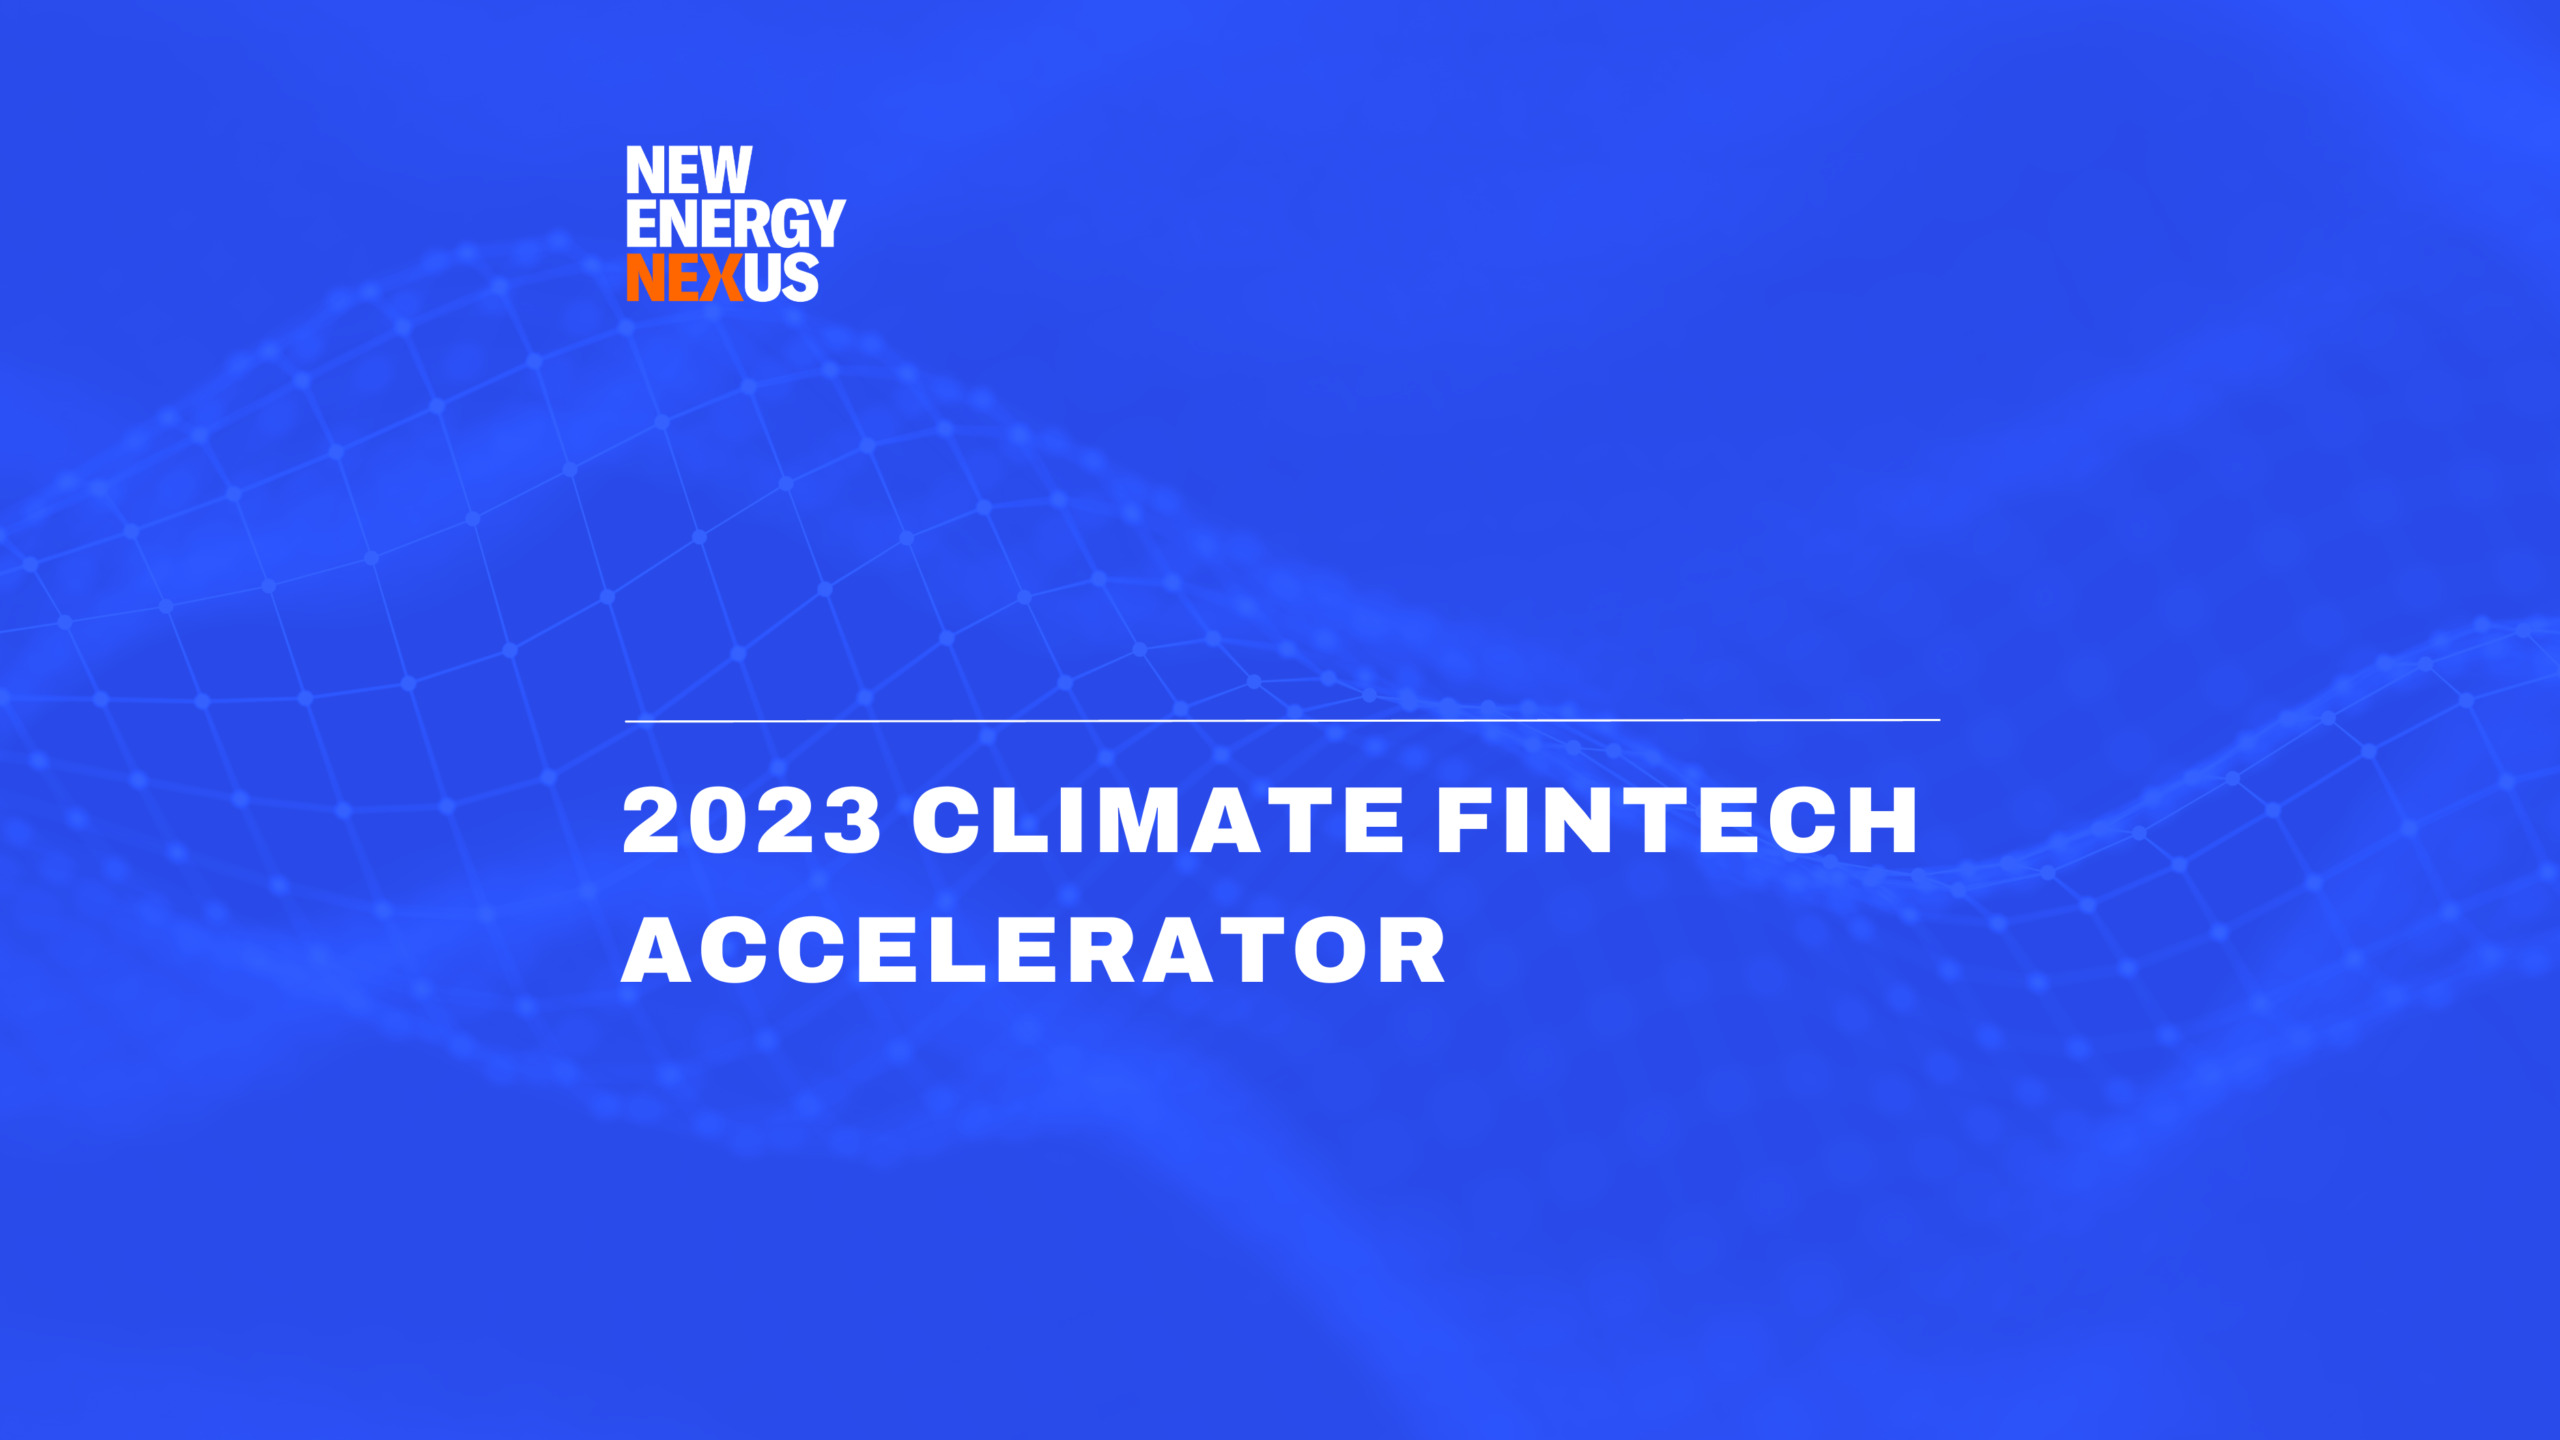 2023 Climate Fintech Accelerator Opens to Startups Around the World